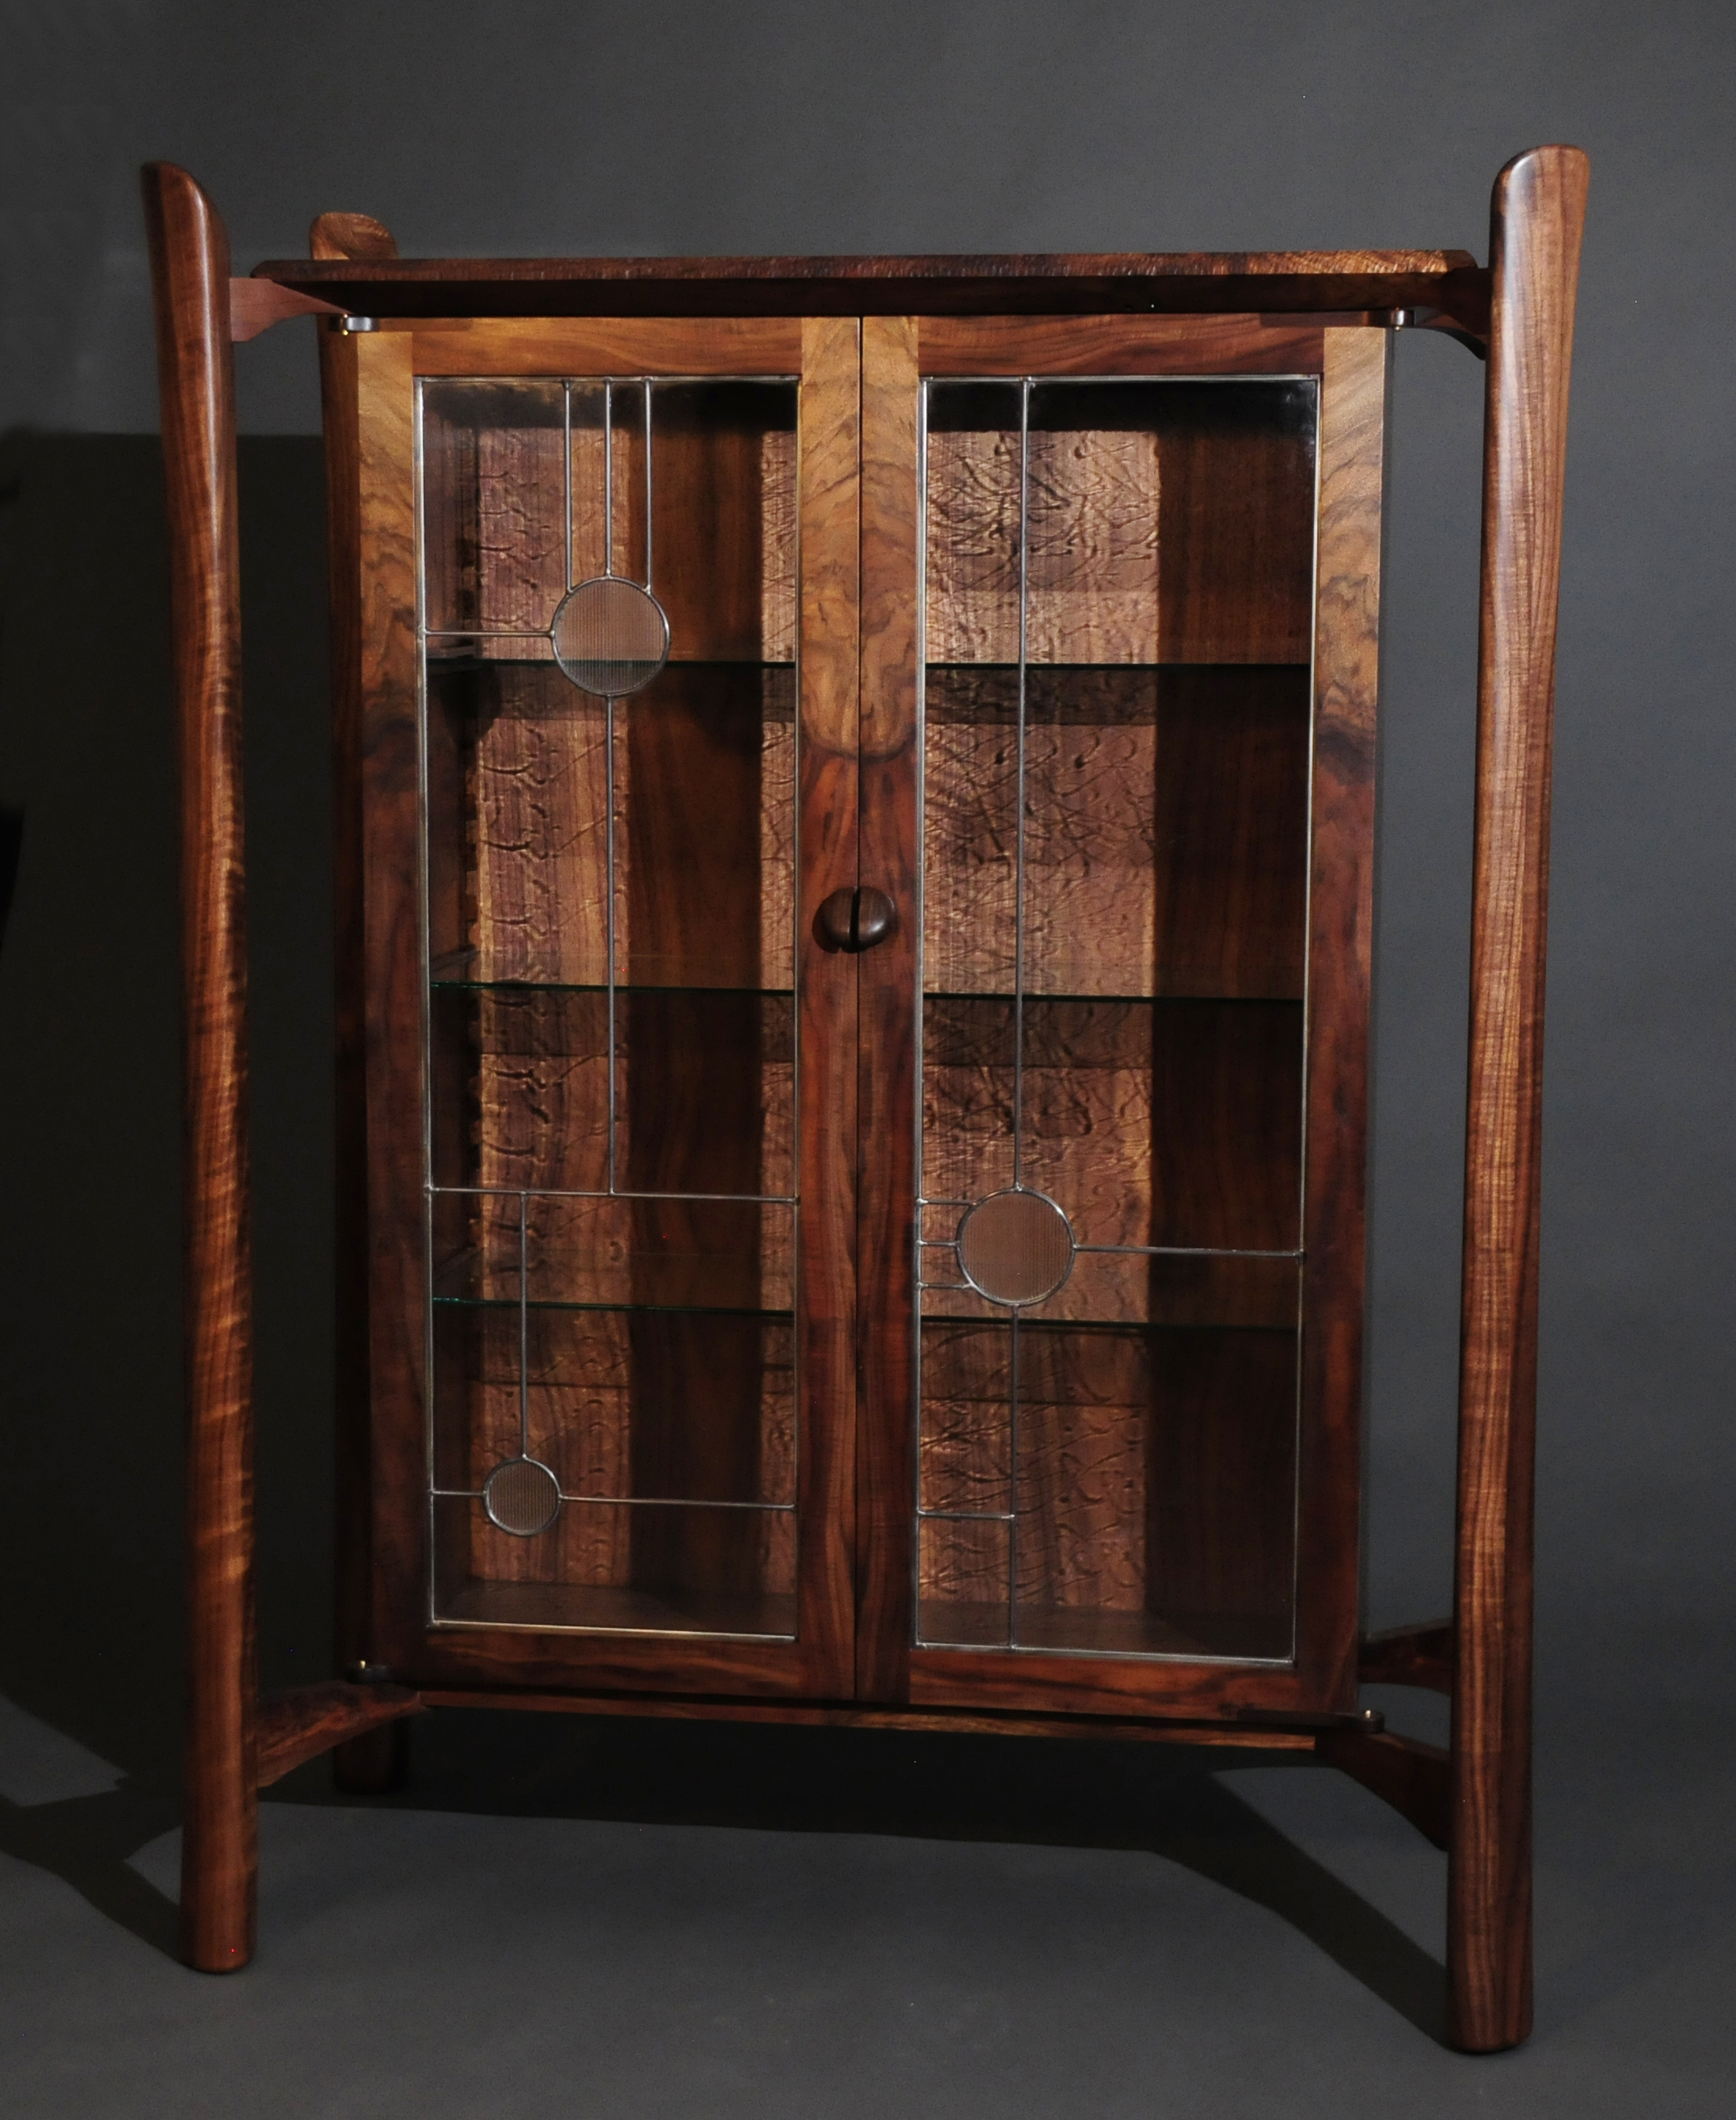 Display Cabinet with leaded glass doors